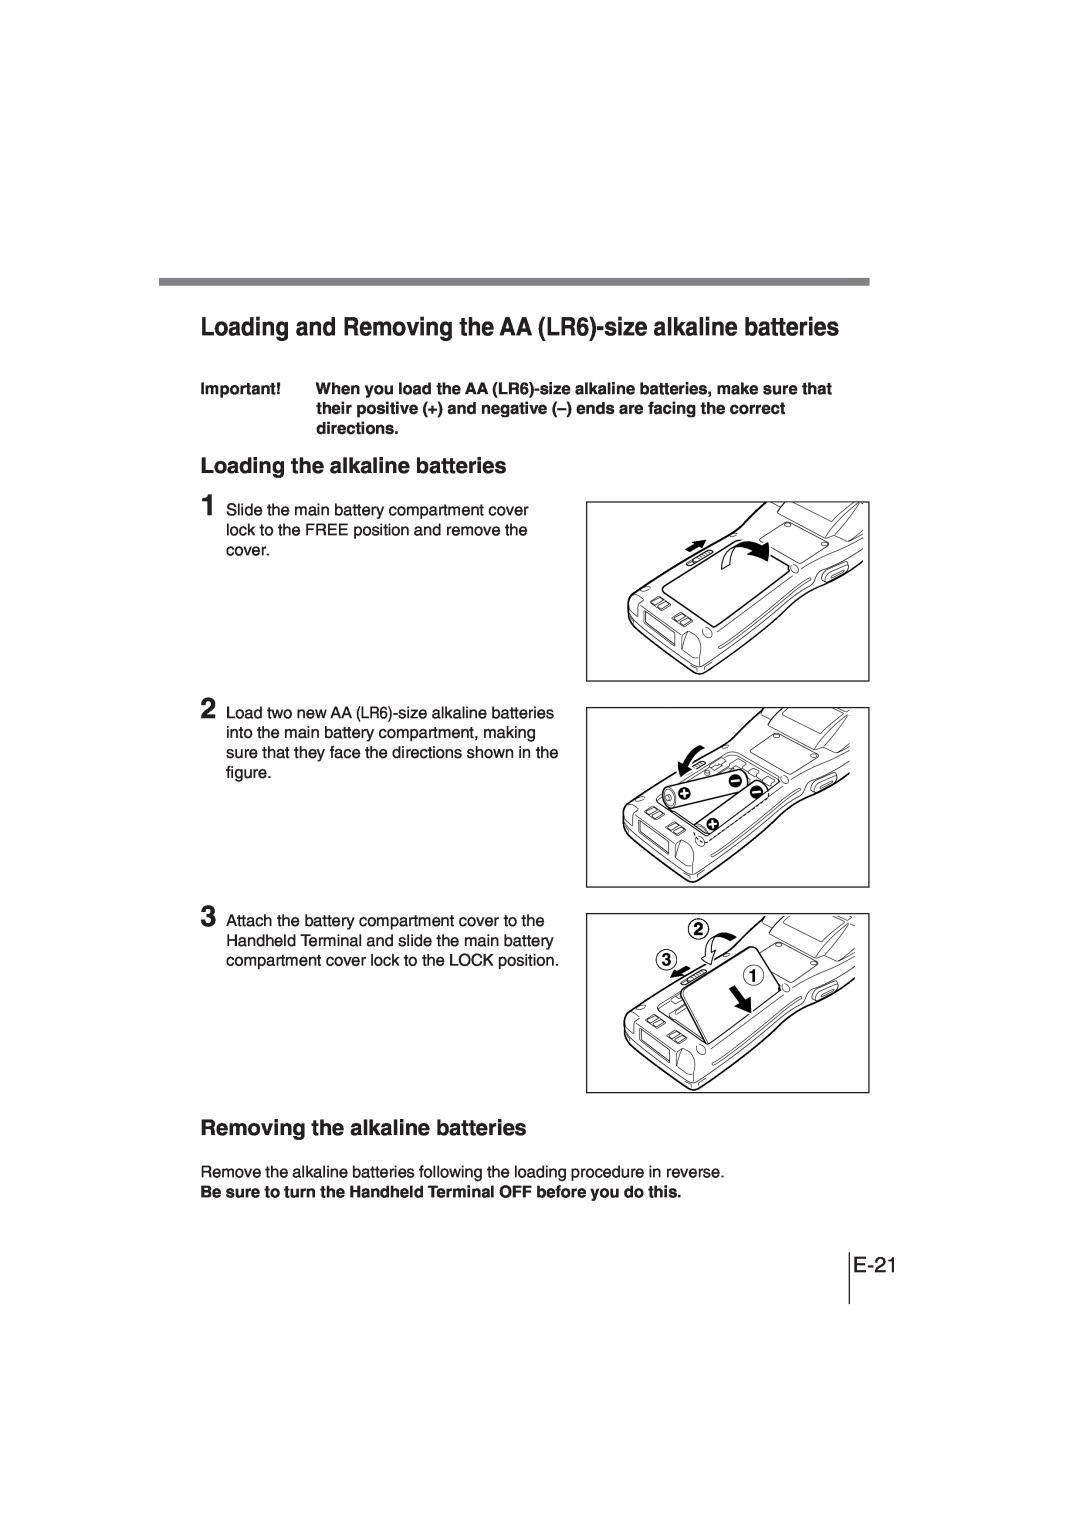 Casio DT-930 manual Loading the alkaline batteries, Removing the alkaline batteries, E-21 